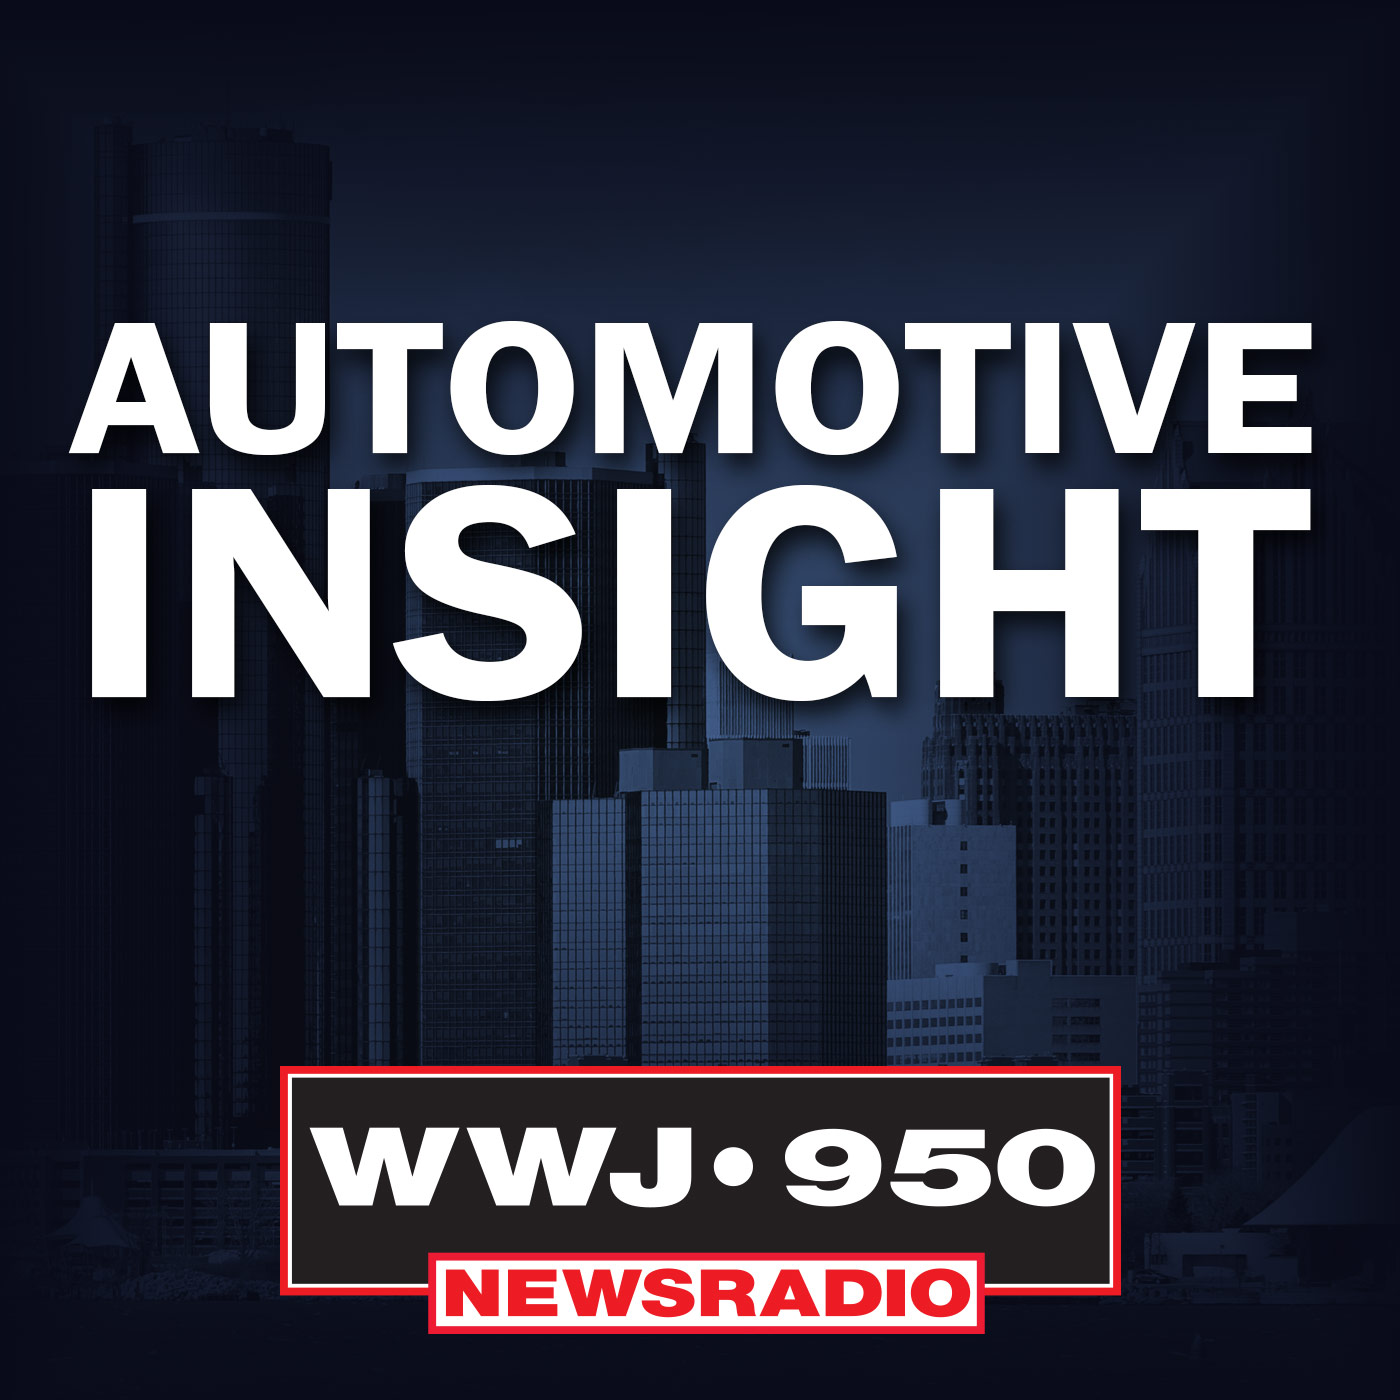 Automotive Insight - Making cars with clean steel and aluminum